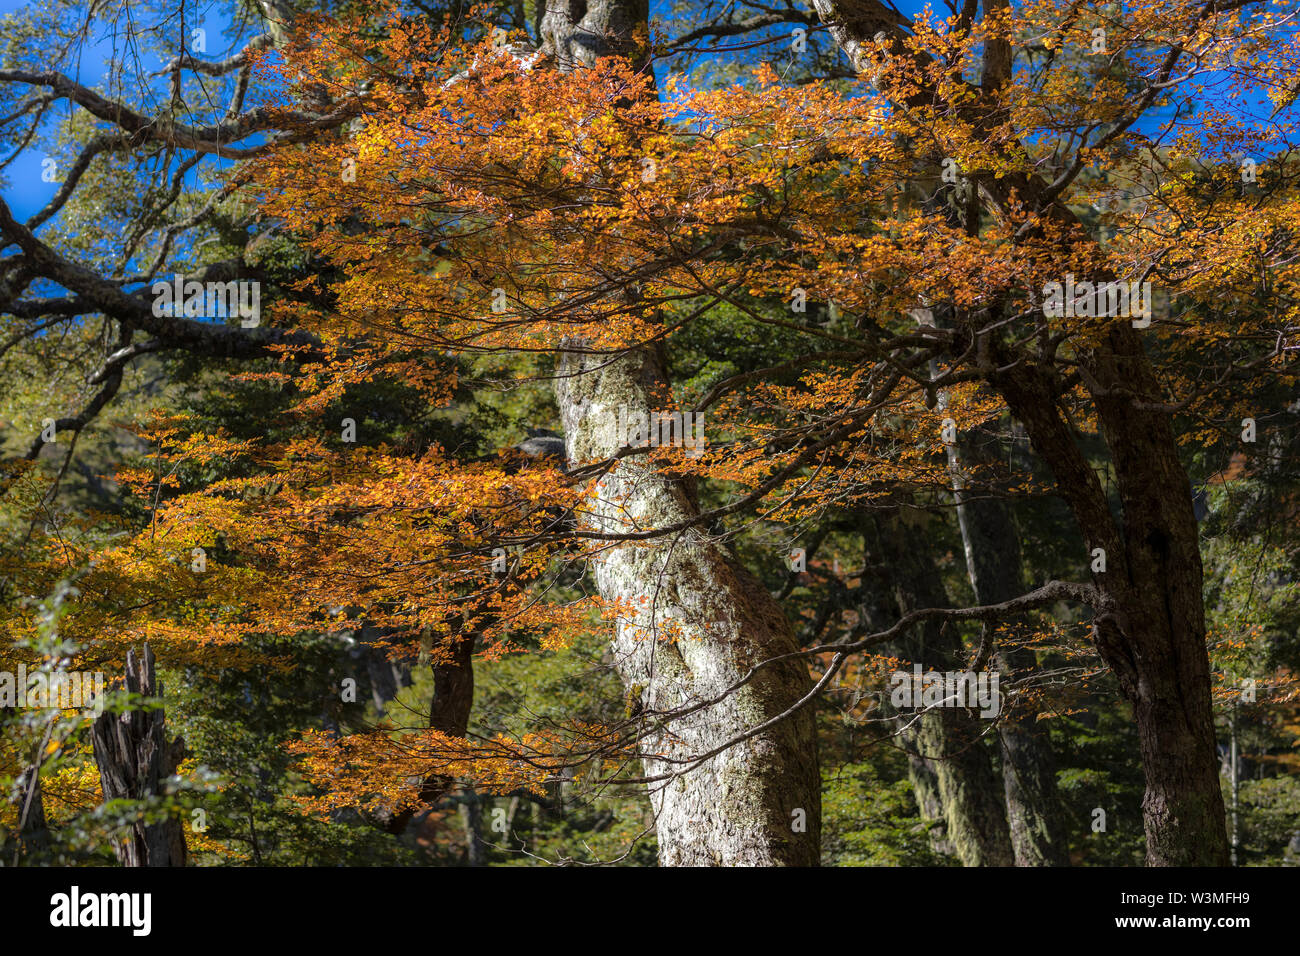 Amazing autumn leaf color view at Conguillio National Park forest. An awesome representation of Autumn colors textures on an awe scenery Stock Photo